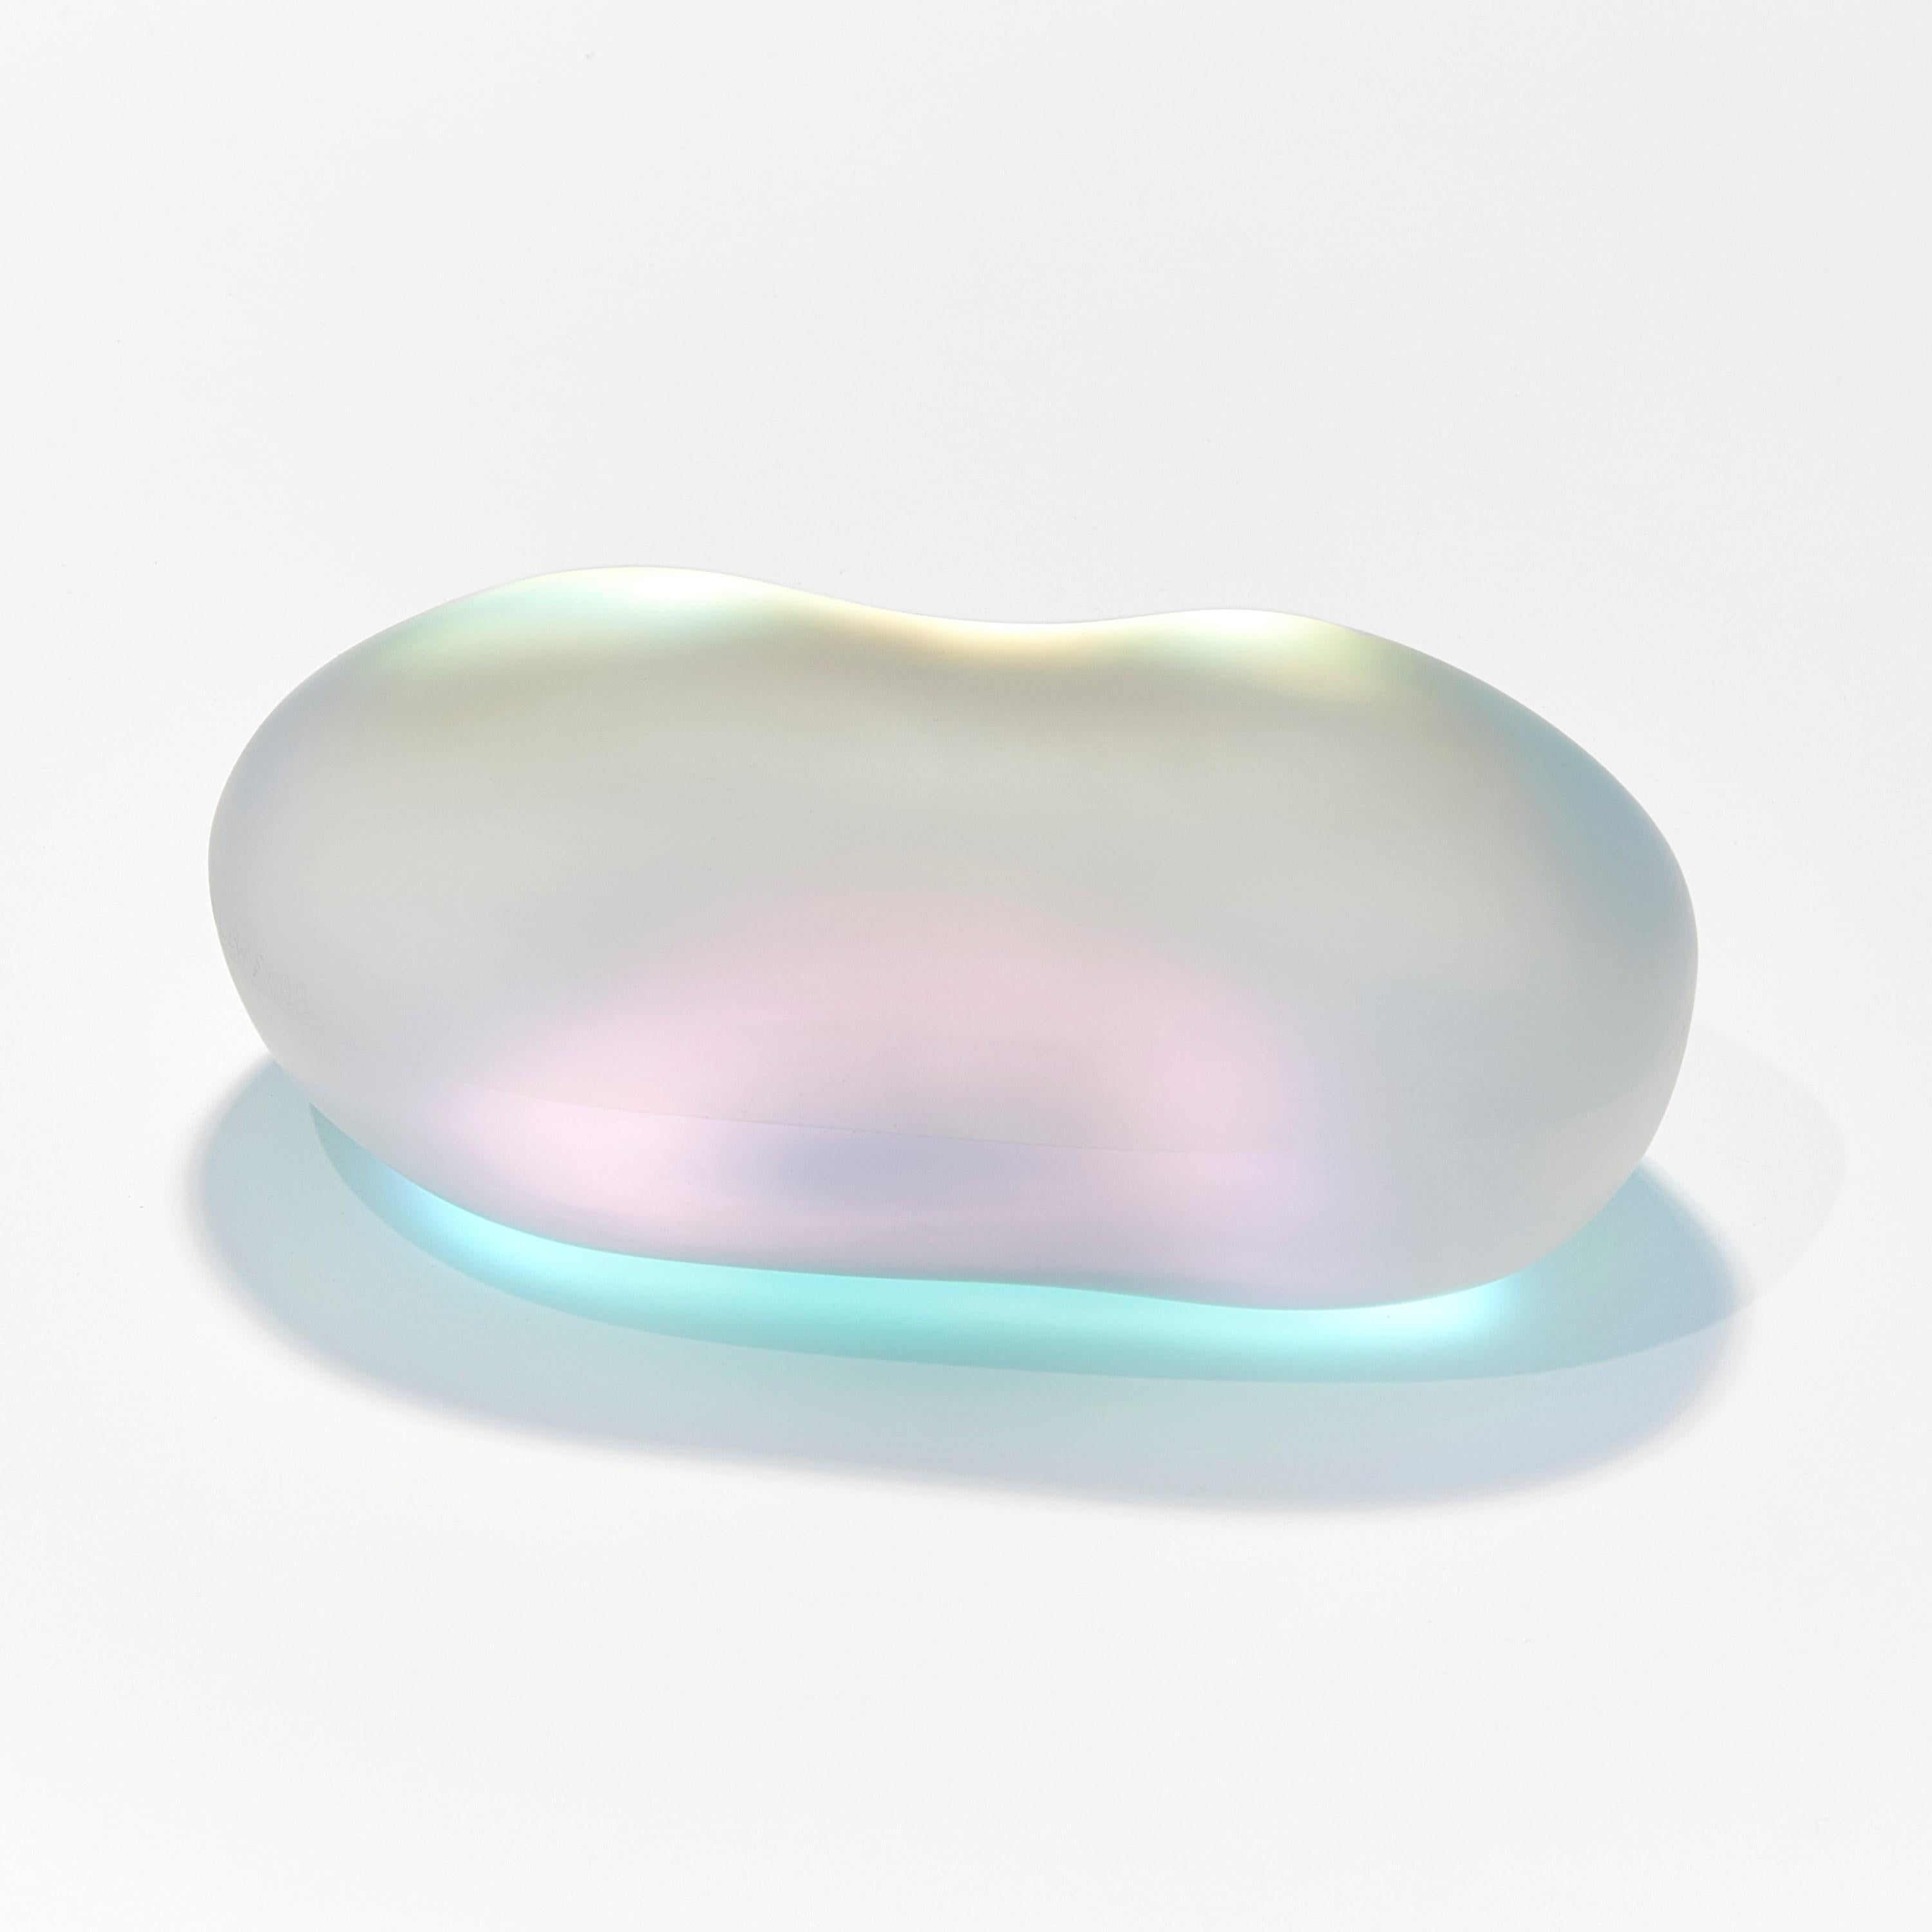 Organic Modern  Moon-rock 013, clear glass sculptural rock with iridescent colours by Jon Lewis